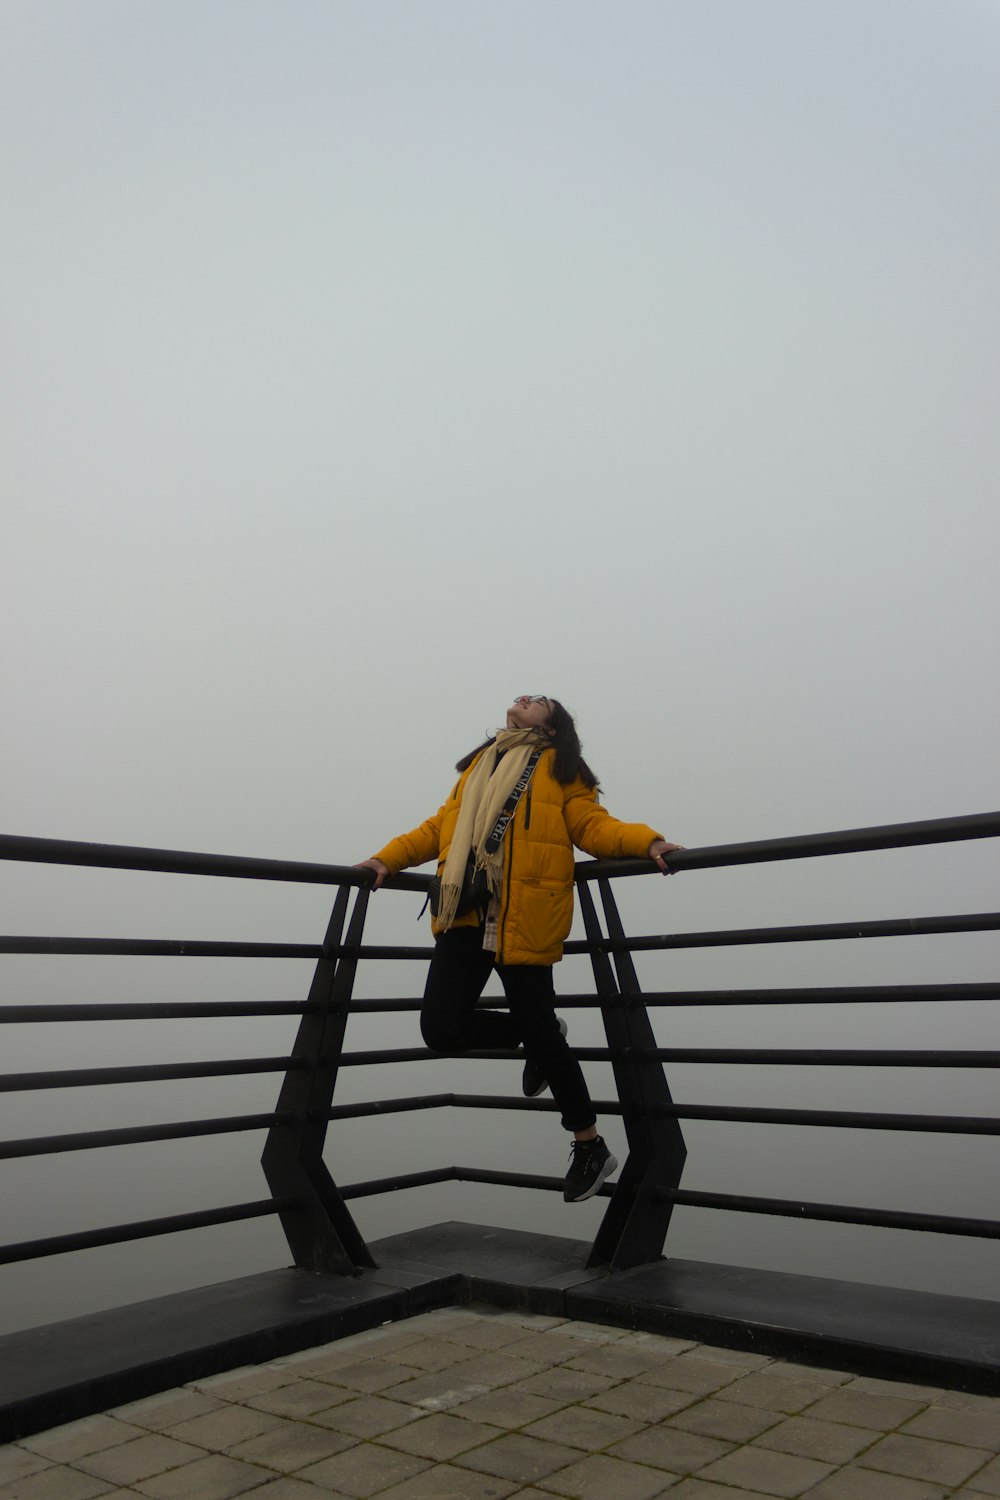 a woman in a yellow jacket is standing on a railing